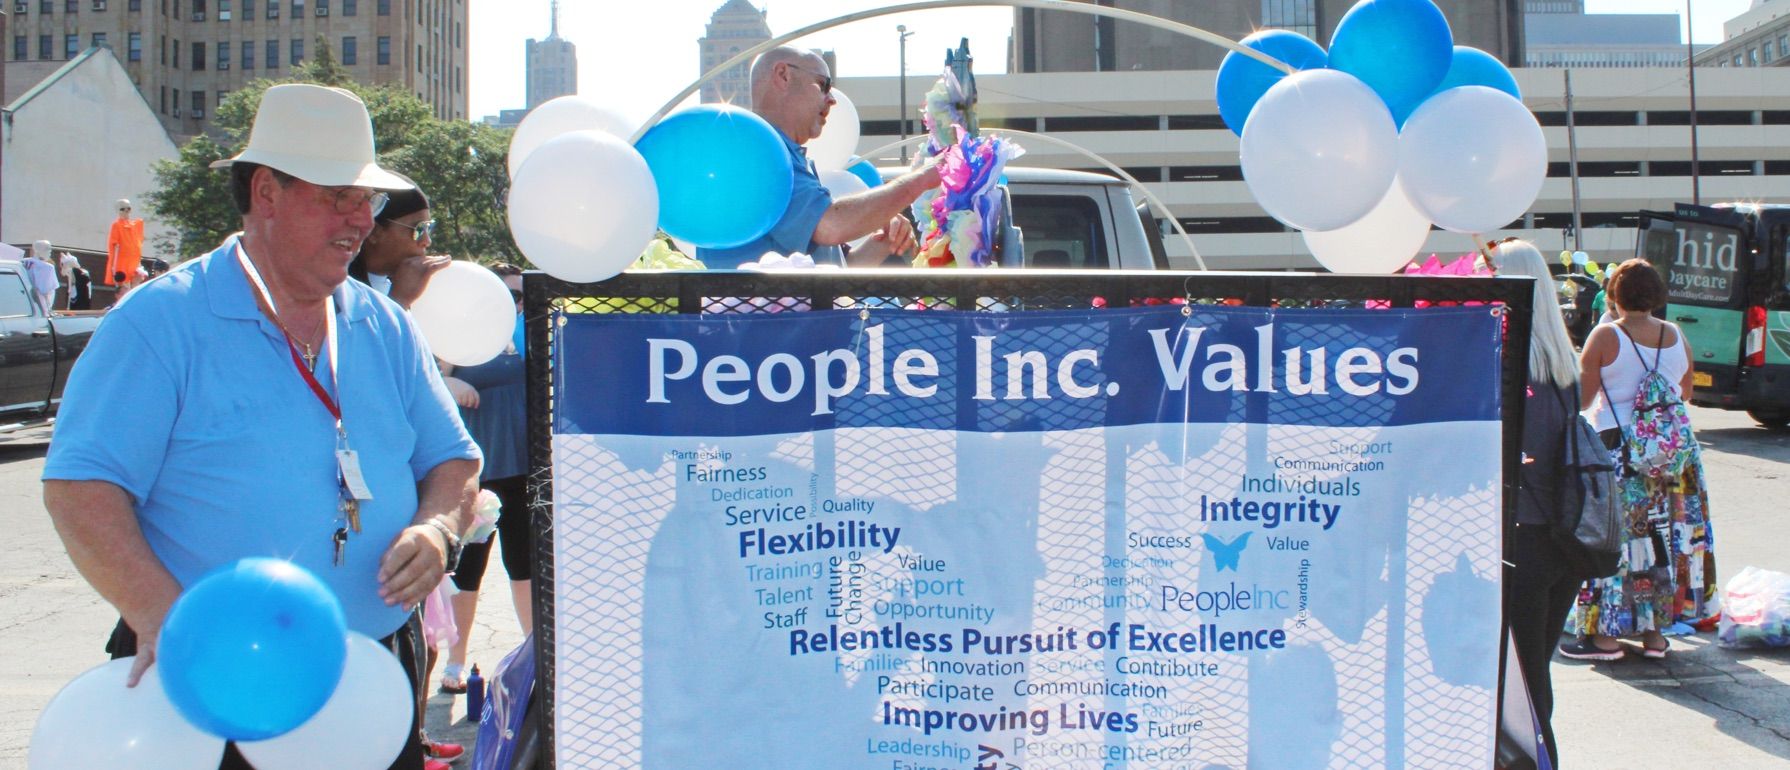 Upcoming events: Banner with People Inc. values surrounded by balloons